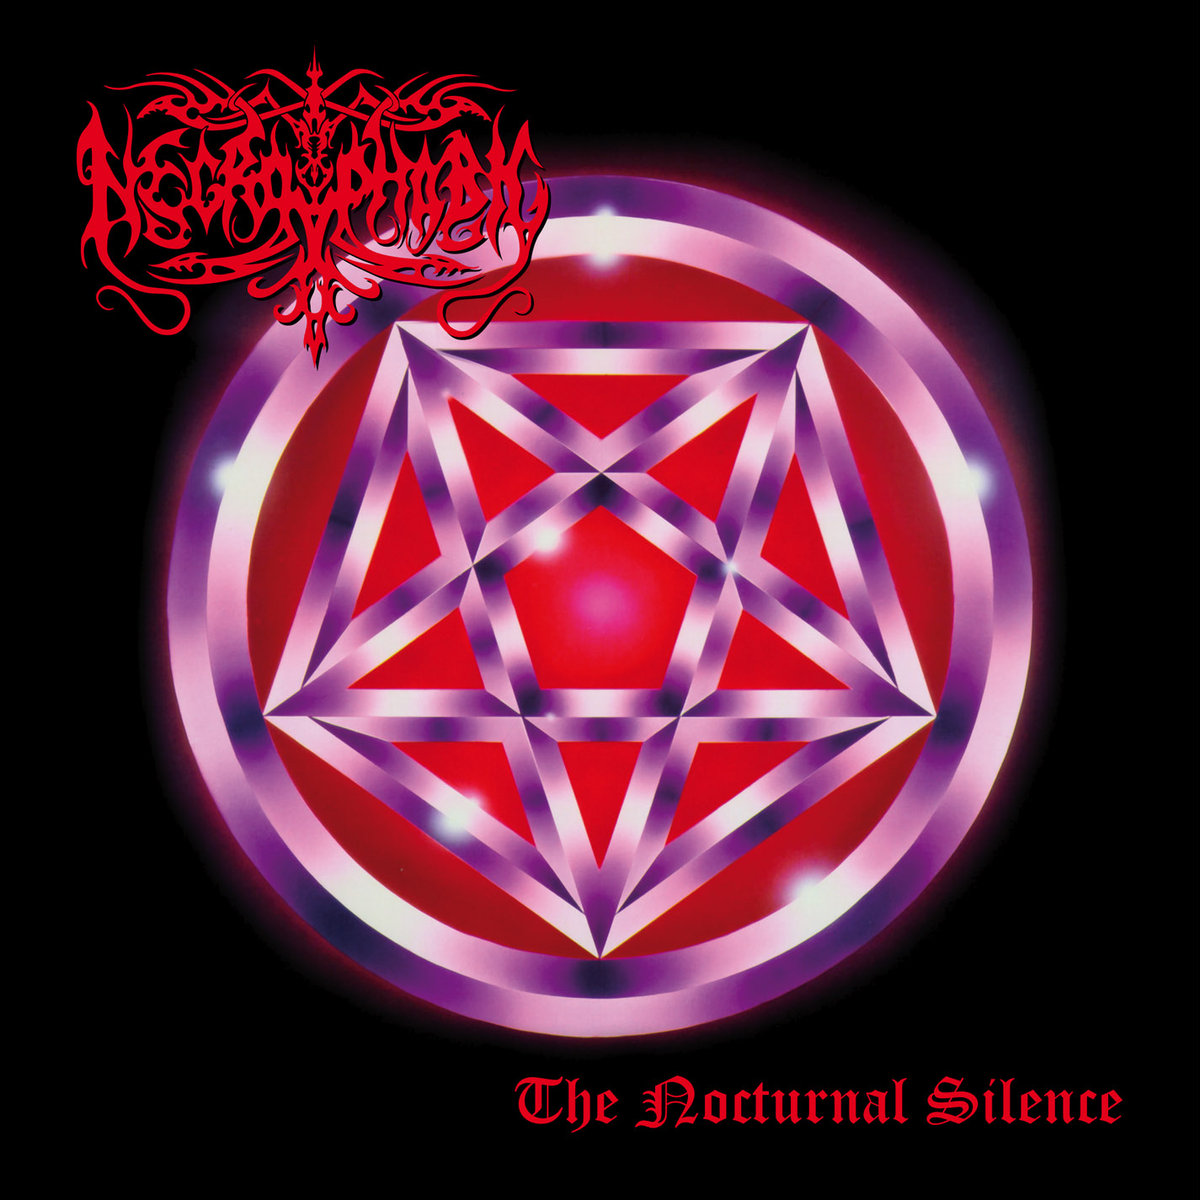 Necrophobic-The Nocturnal Silence-REMASTERED-LP-FLAC-2018-mwnd Download